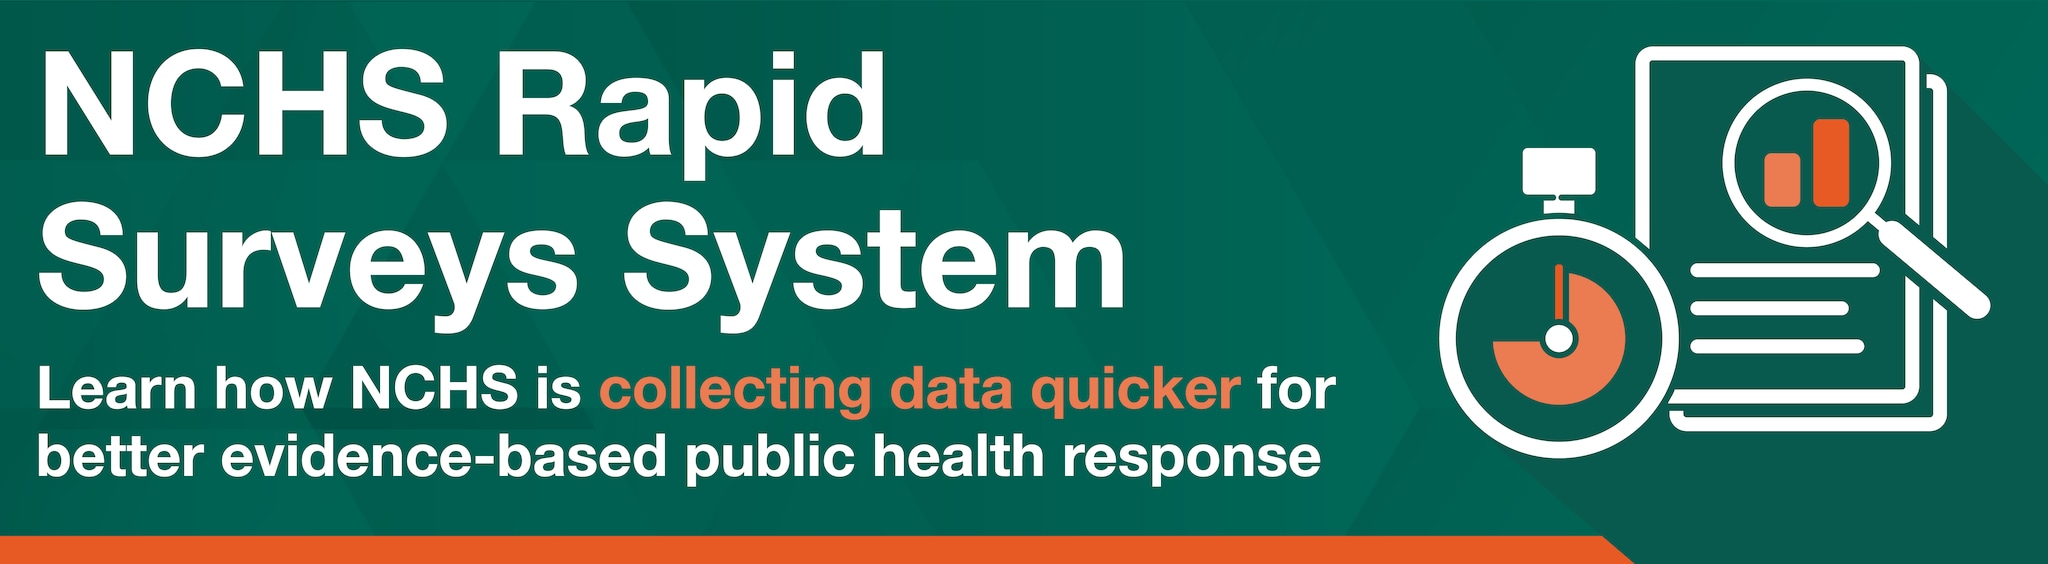 The image shows a stopwatch and report icons with text reading, “NCHS Rapid Surveys System. Learn how NCHS is collecting data quicker for better evidence-based public health response.”